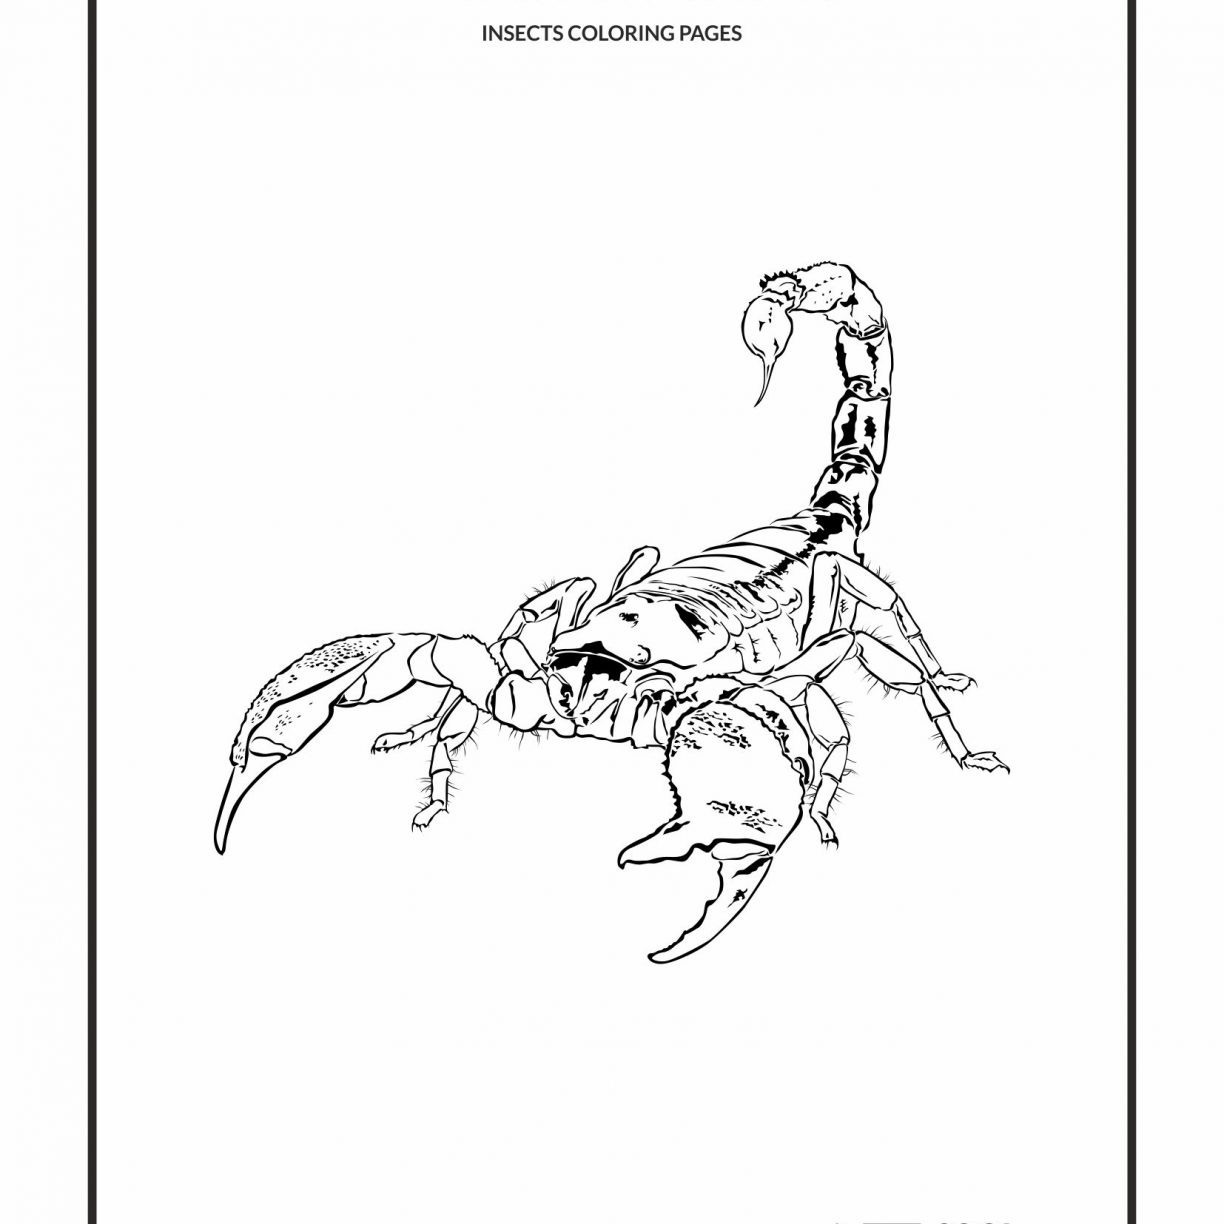 Scorpion Coloring Pages
 Scorpion Cartoon Drawing at GetDrawings